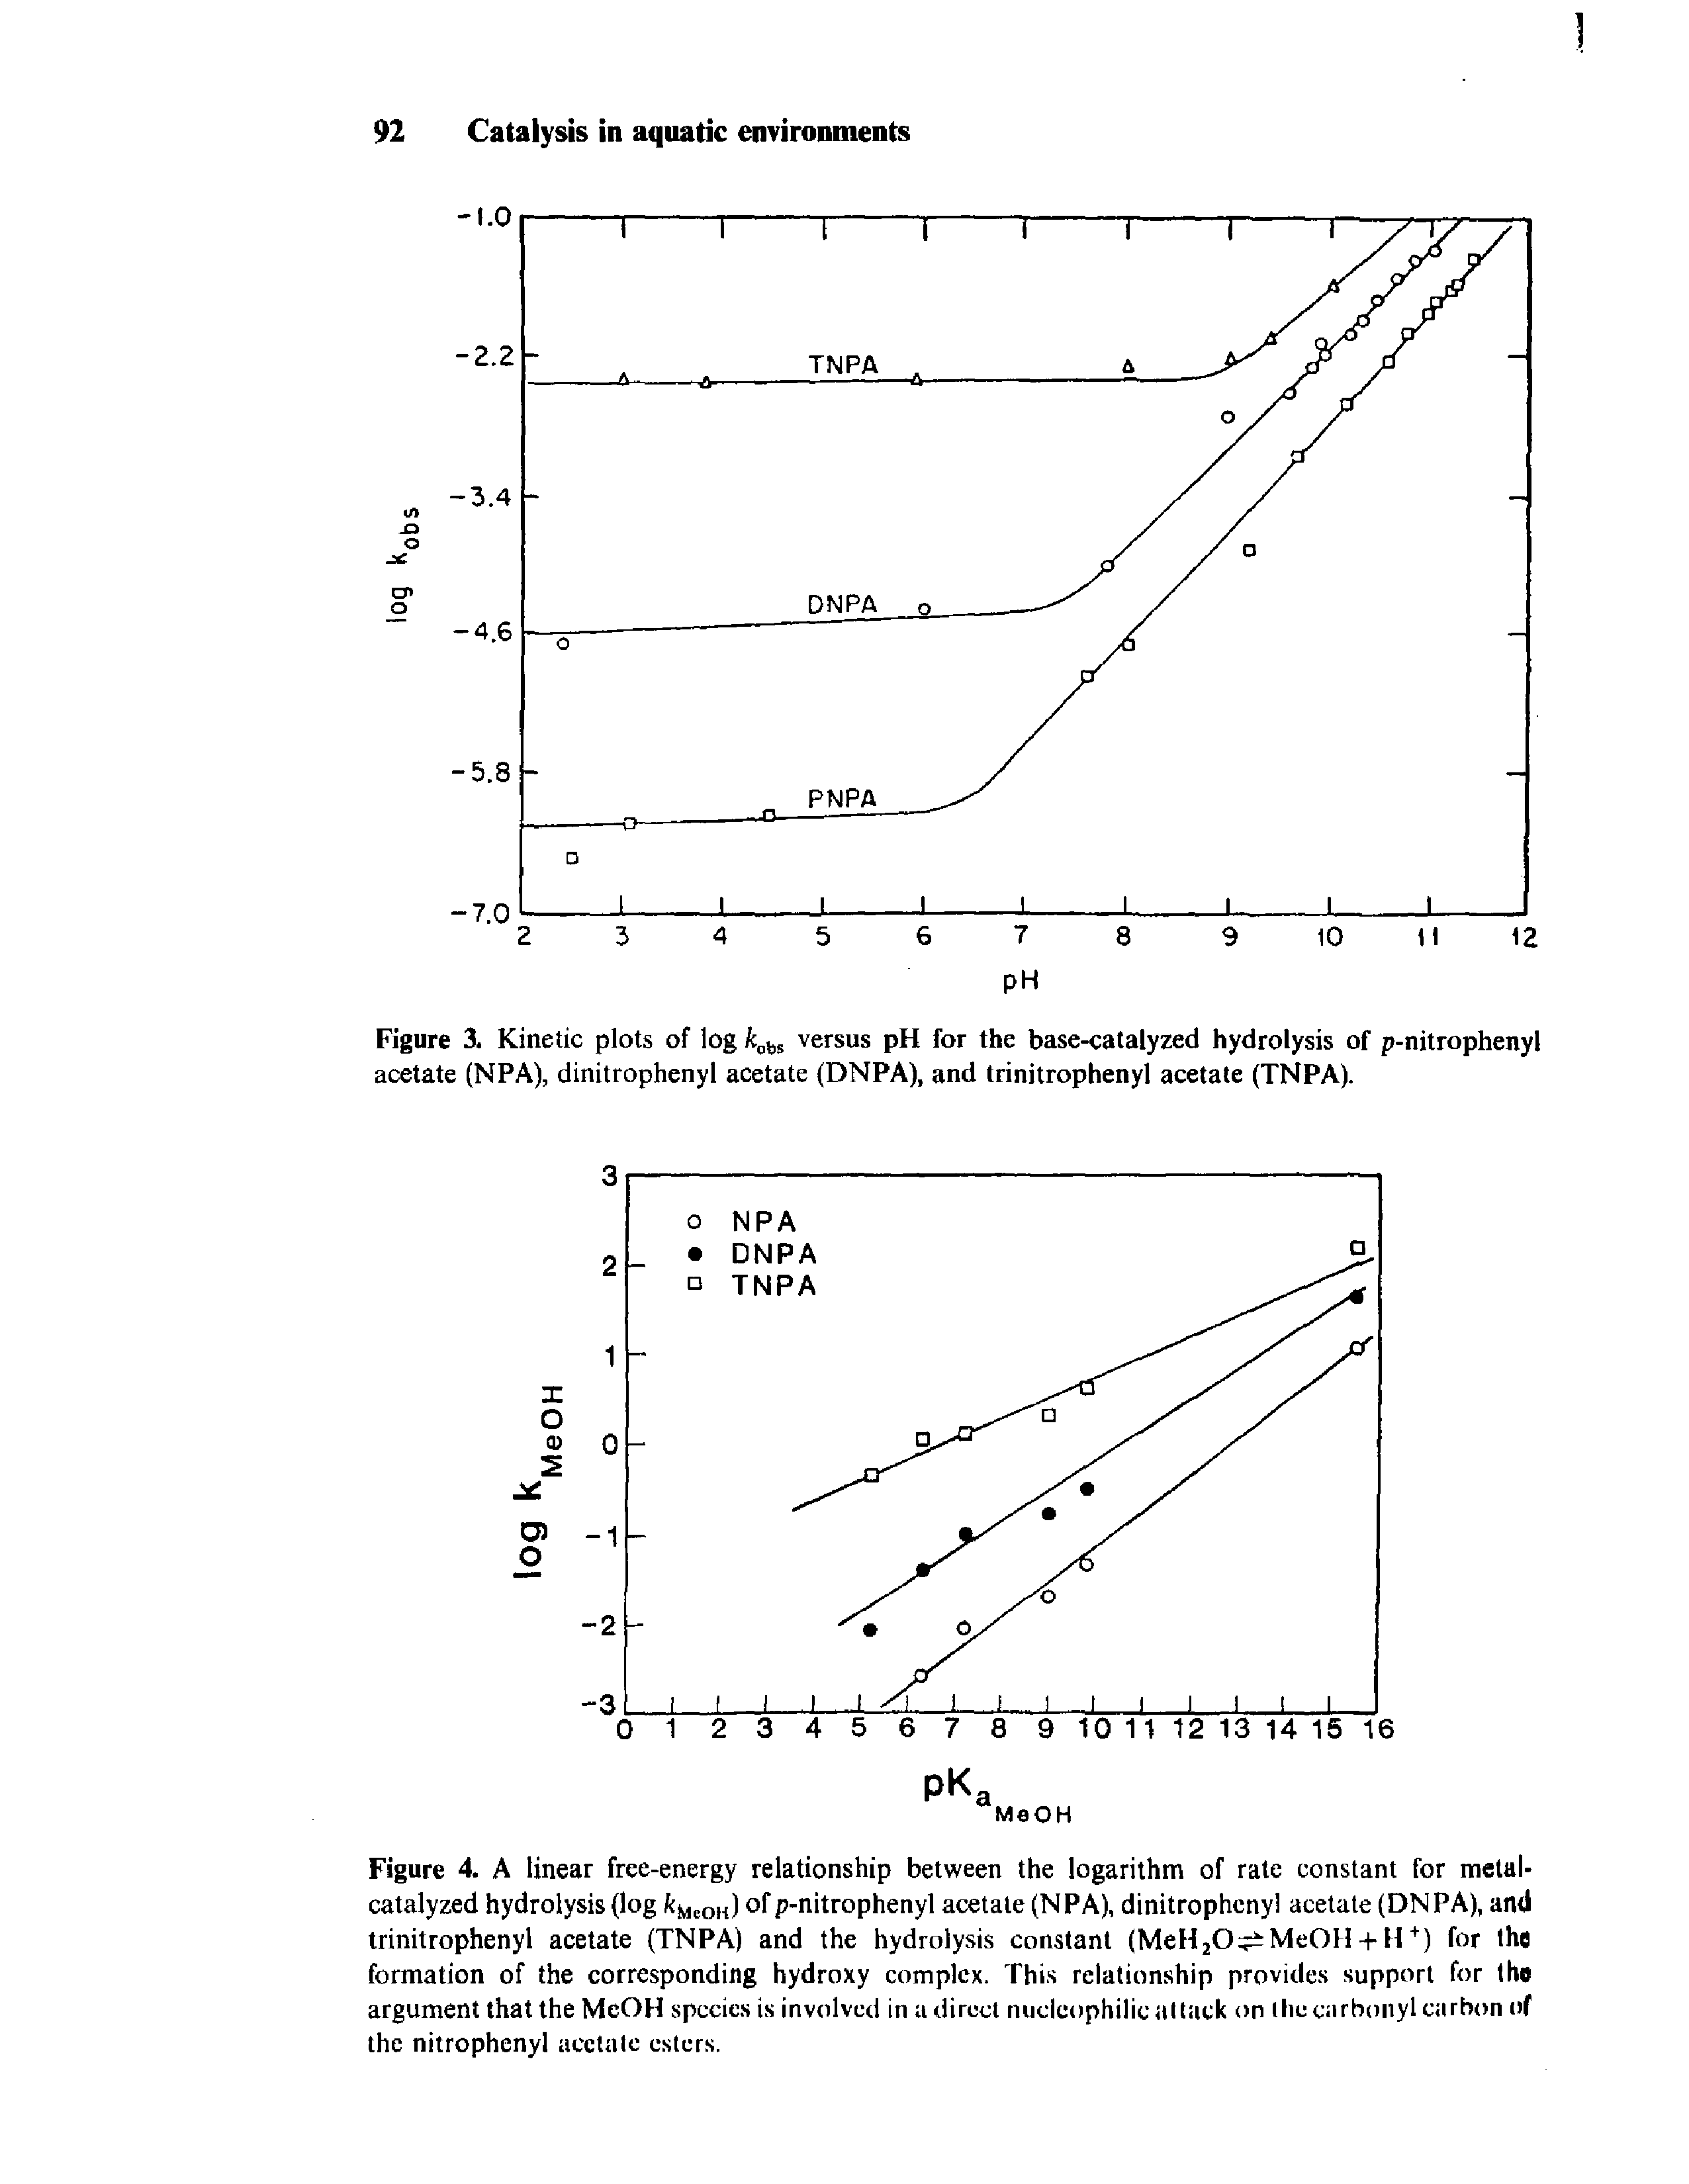 Figure 4. A linear free-energy relationship between the logarithm of rate constant for metal-catalyzed hydrolysis log fcMeOK) of p-nitrophenyl acetate (NPA), dinitrophenyl acetate (DNPA), and trinitrophenyl acetate (TNPA) and the hydrolysis constant (MeH2O MeOH + H+) for the formation of the corresponding hydroxy complex. This relationship provides support for the argument that the MeOH species is involved in a direct nucleophilic attack on the carbonyl carbon of the nitrophenyl acetate esters.